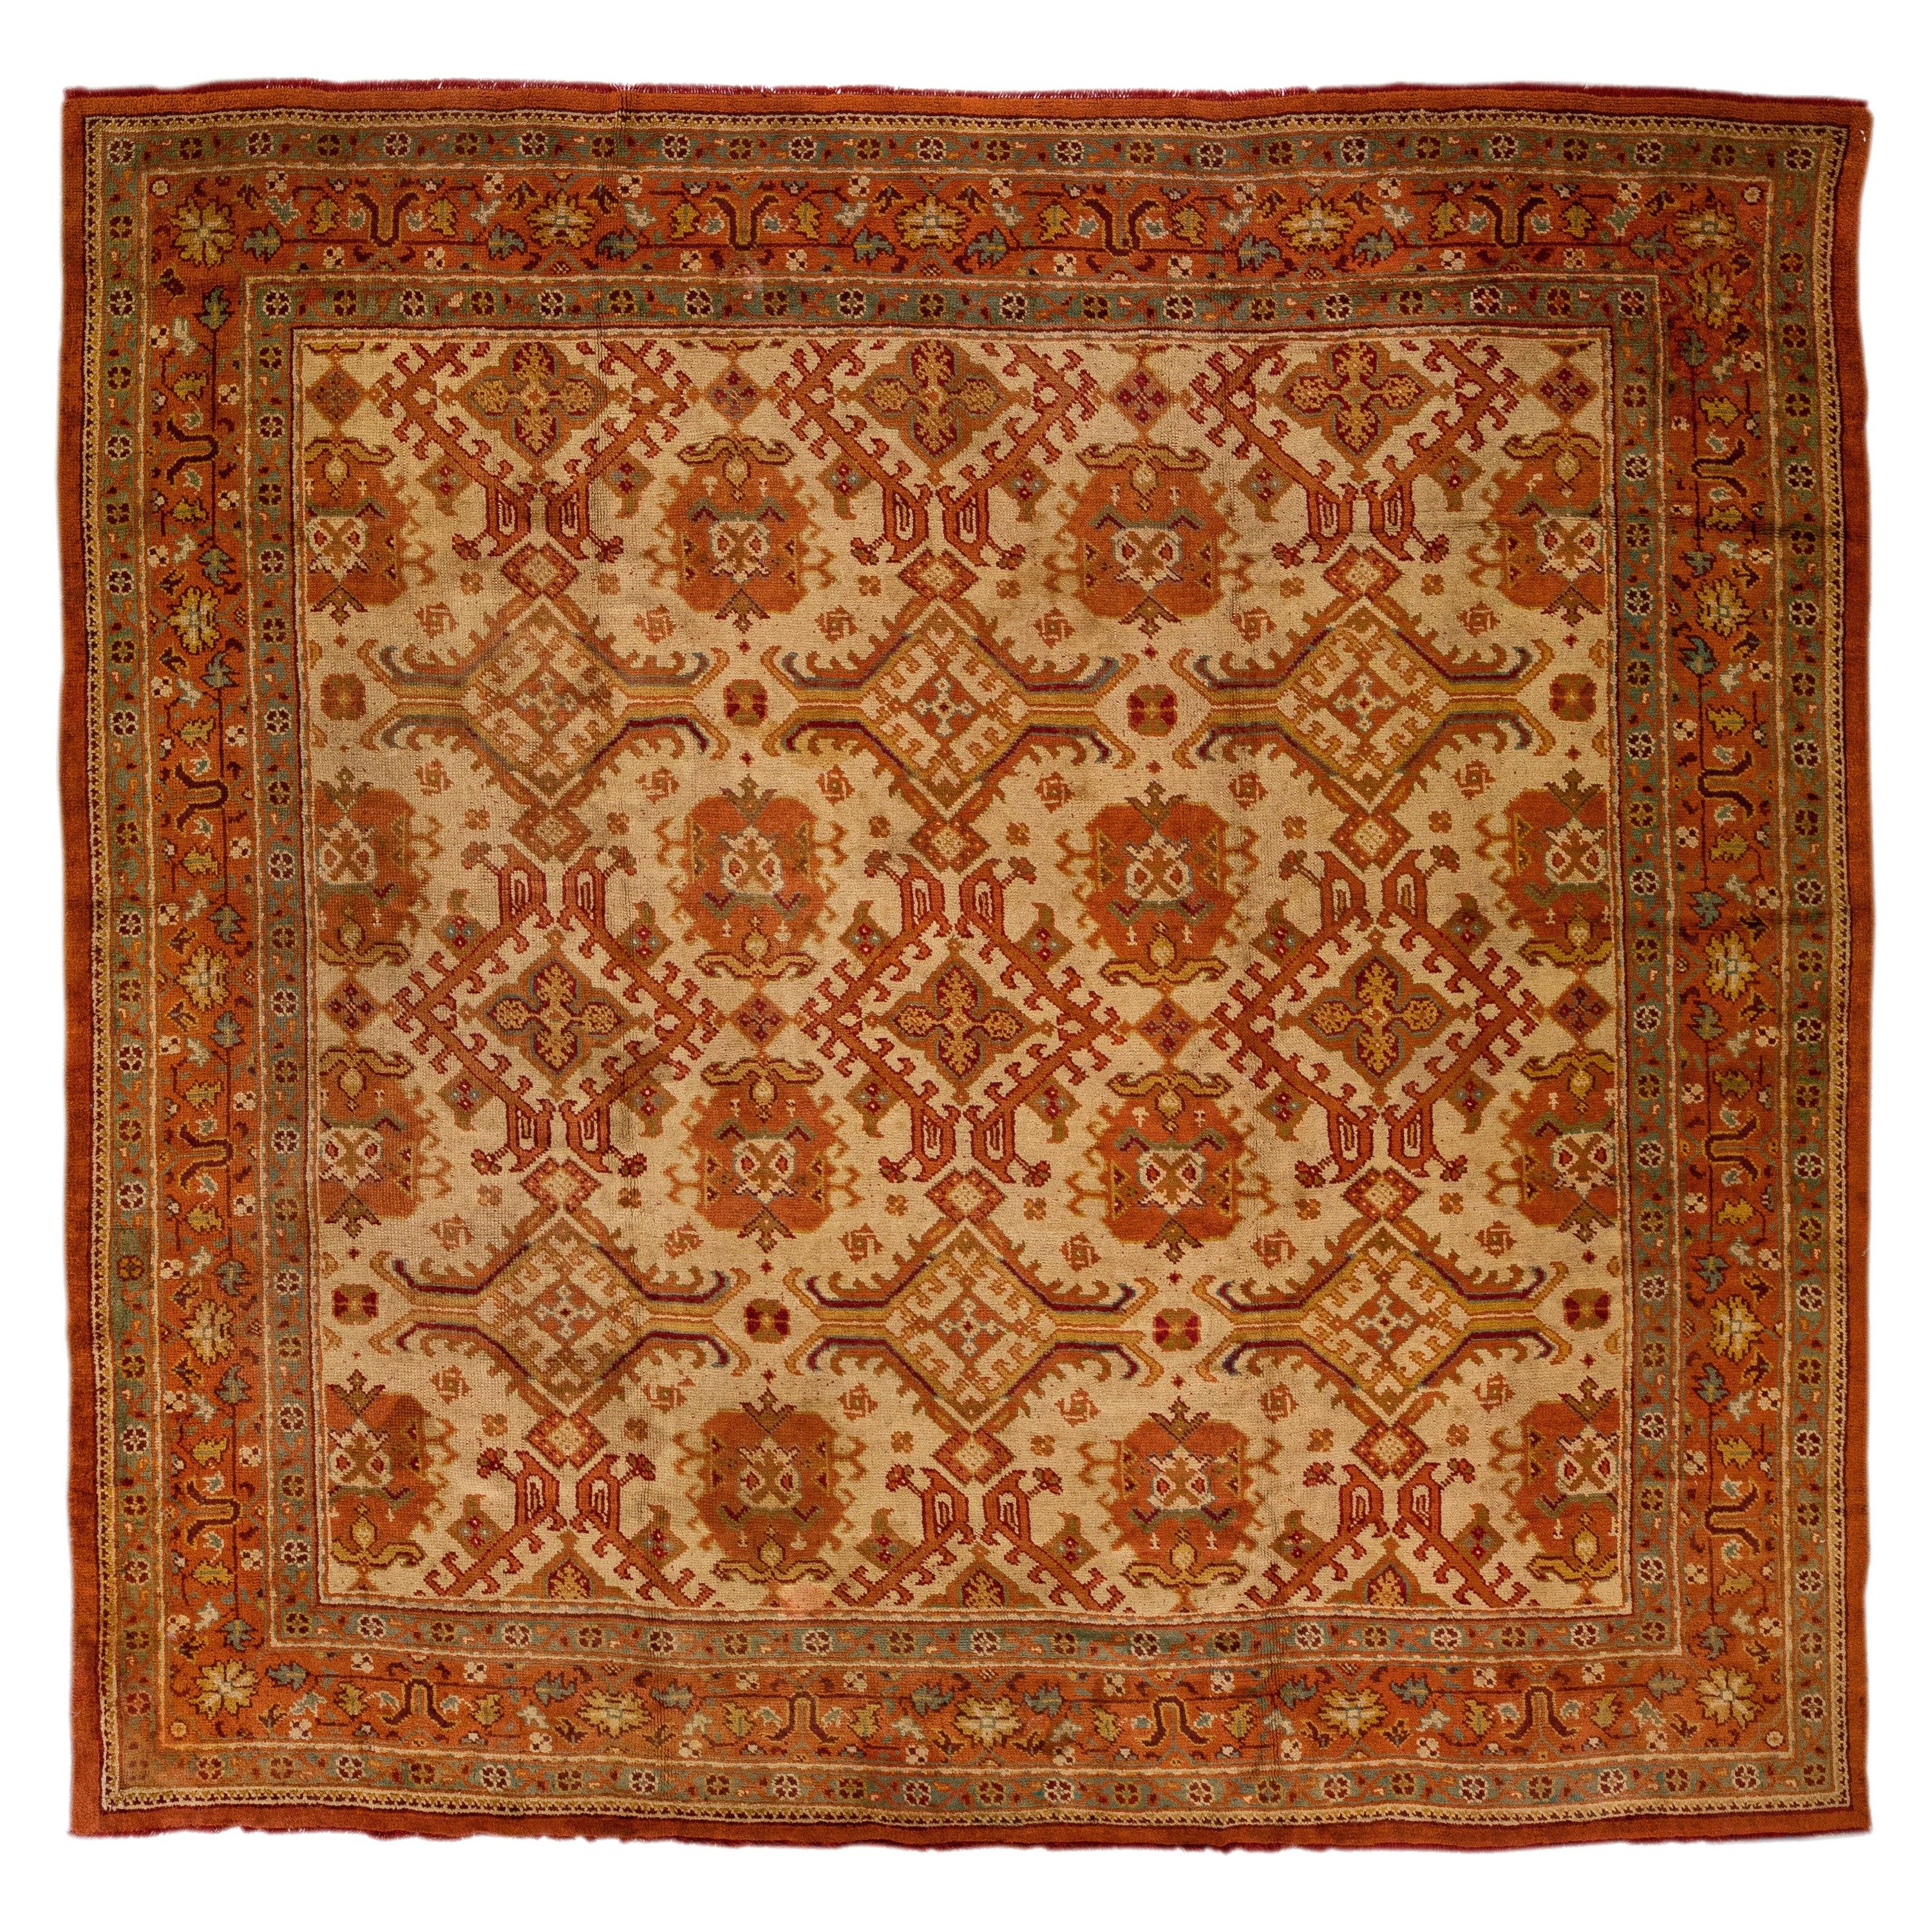 Tan Antique Turkish Oushak Handmade Square Wool Rug with Allover Designed